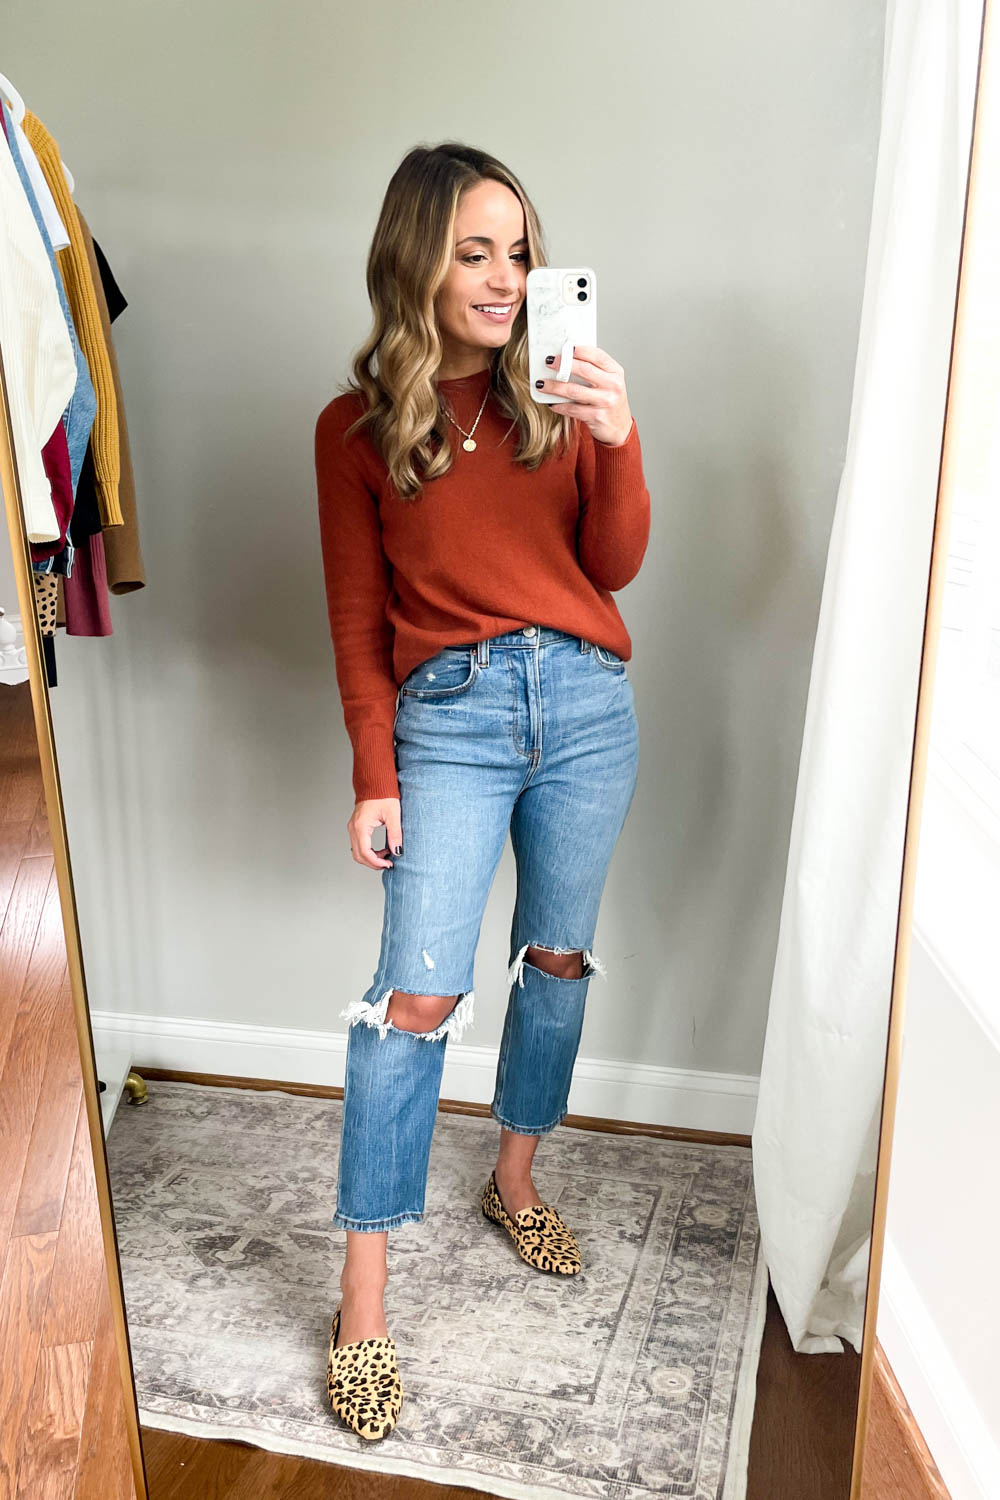 FLARE PANTS & A BODYSUIT: TRENDY SPRING OUTFITS WORTH LOOKING INTO